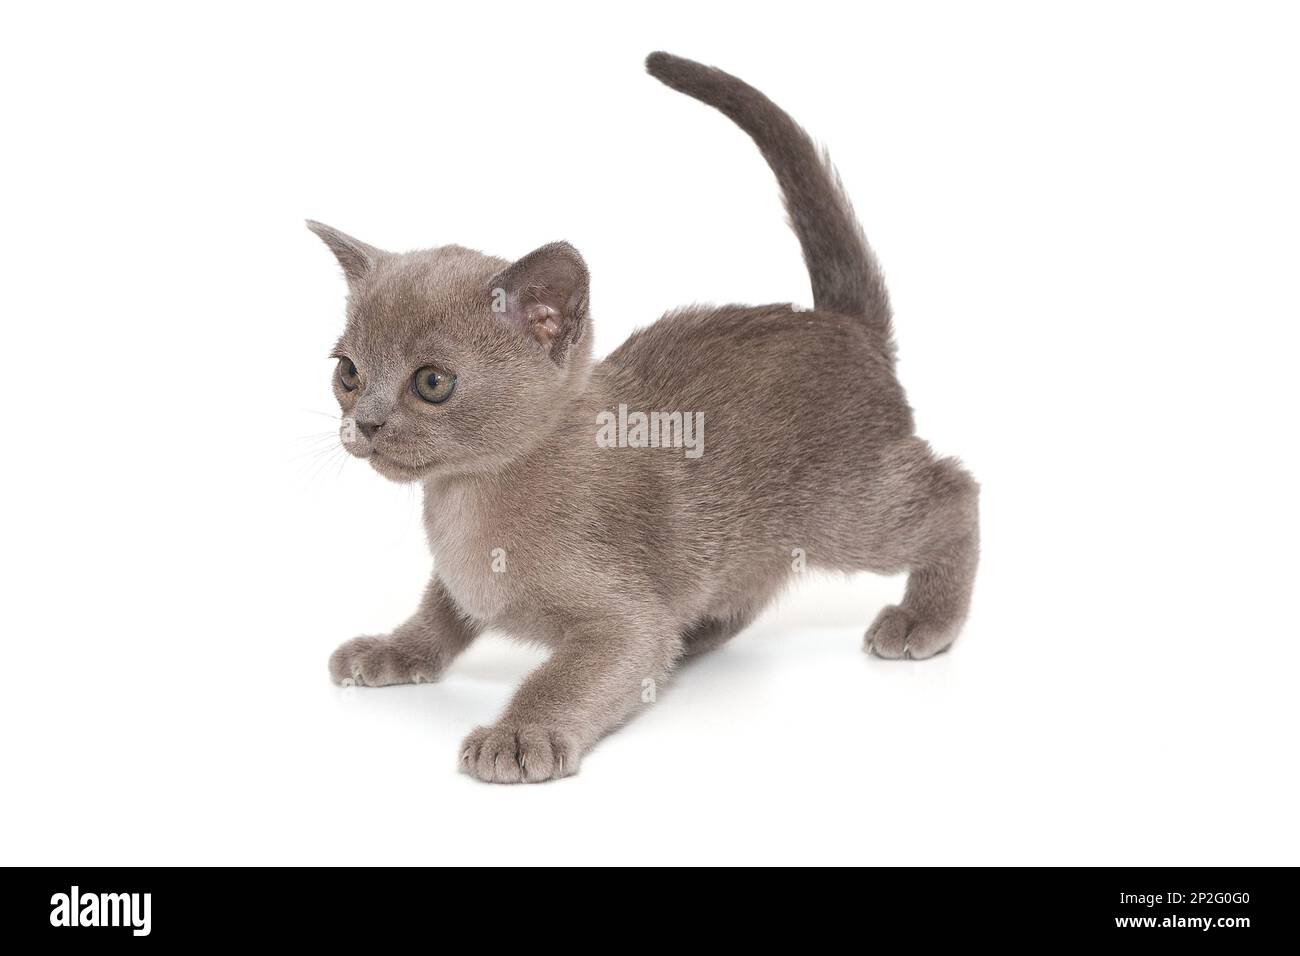 Kitten of the American Burmese blue color, isolated on a white background Stock Photo